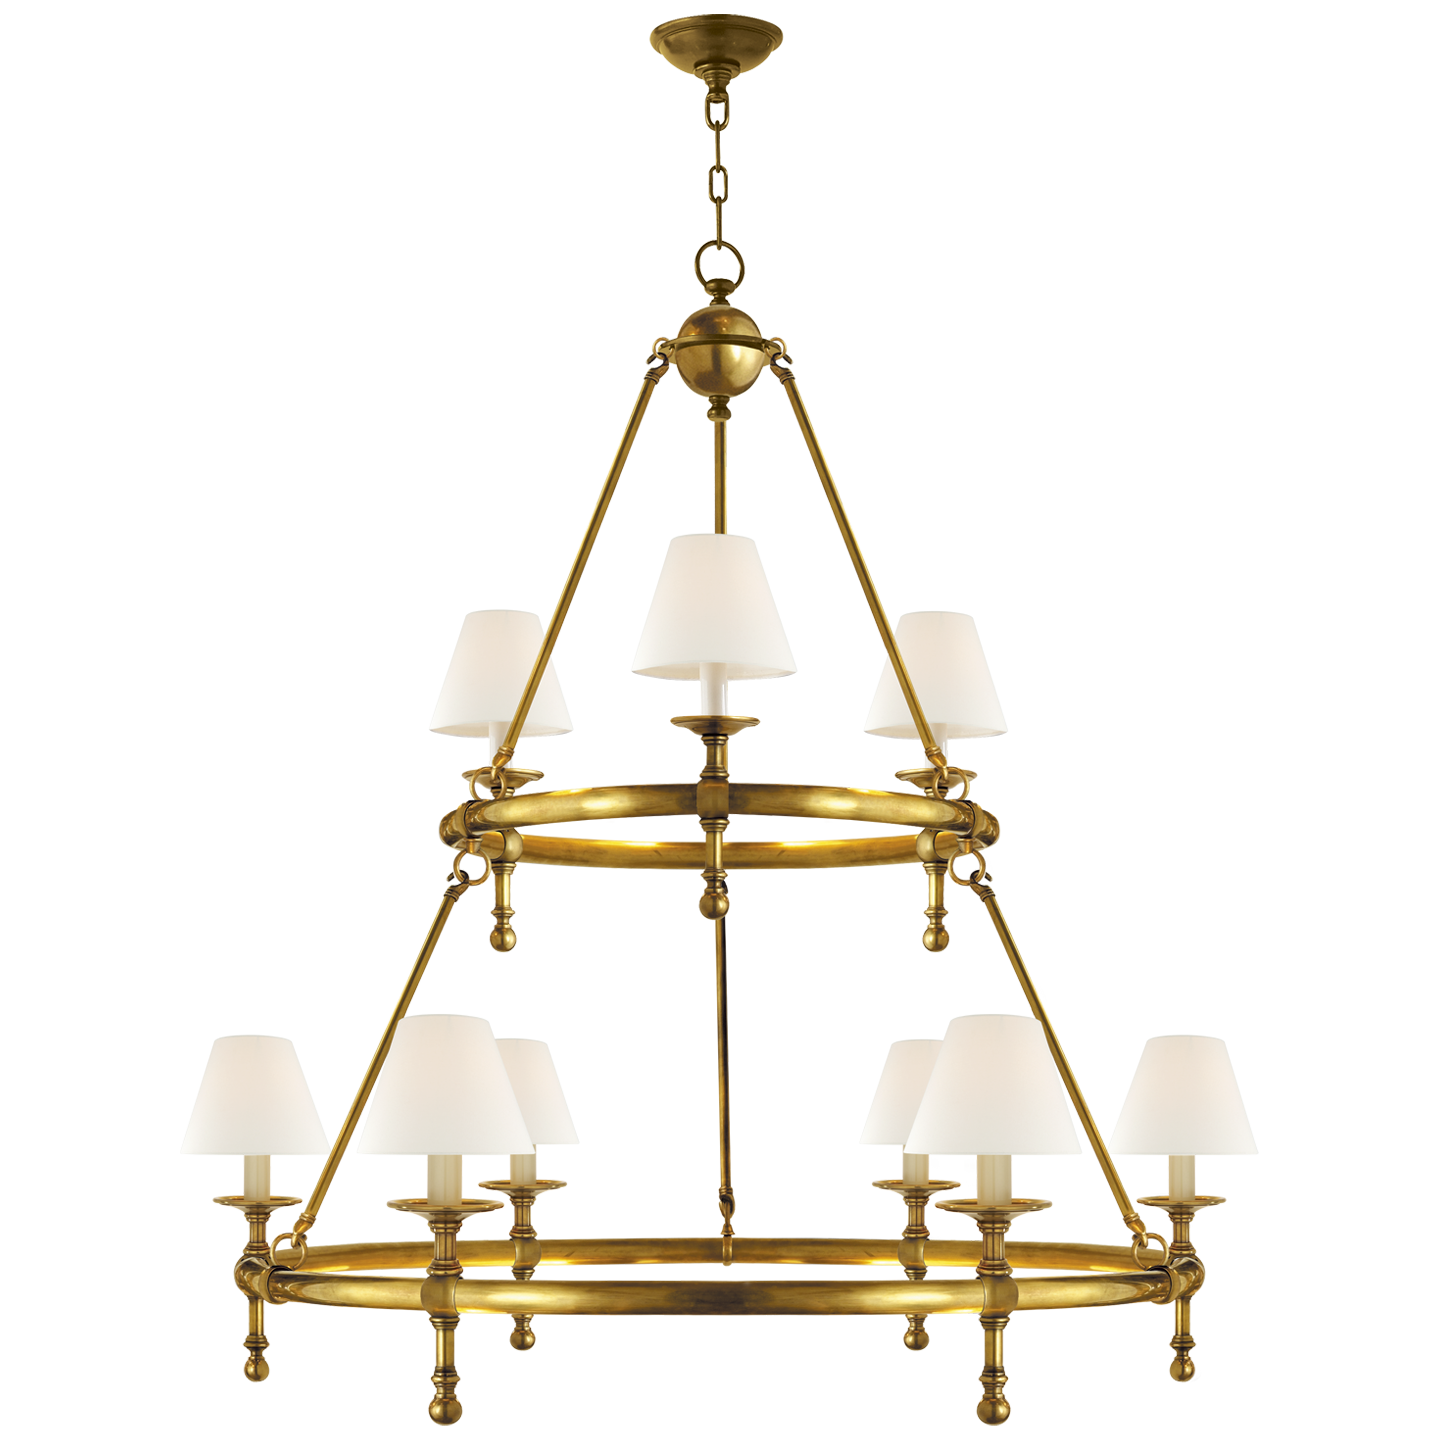 Classic Two-Tier Ring Chandelier in Hand-Rubbed Antique Brass with Nat –  Gramercy Home Design